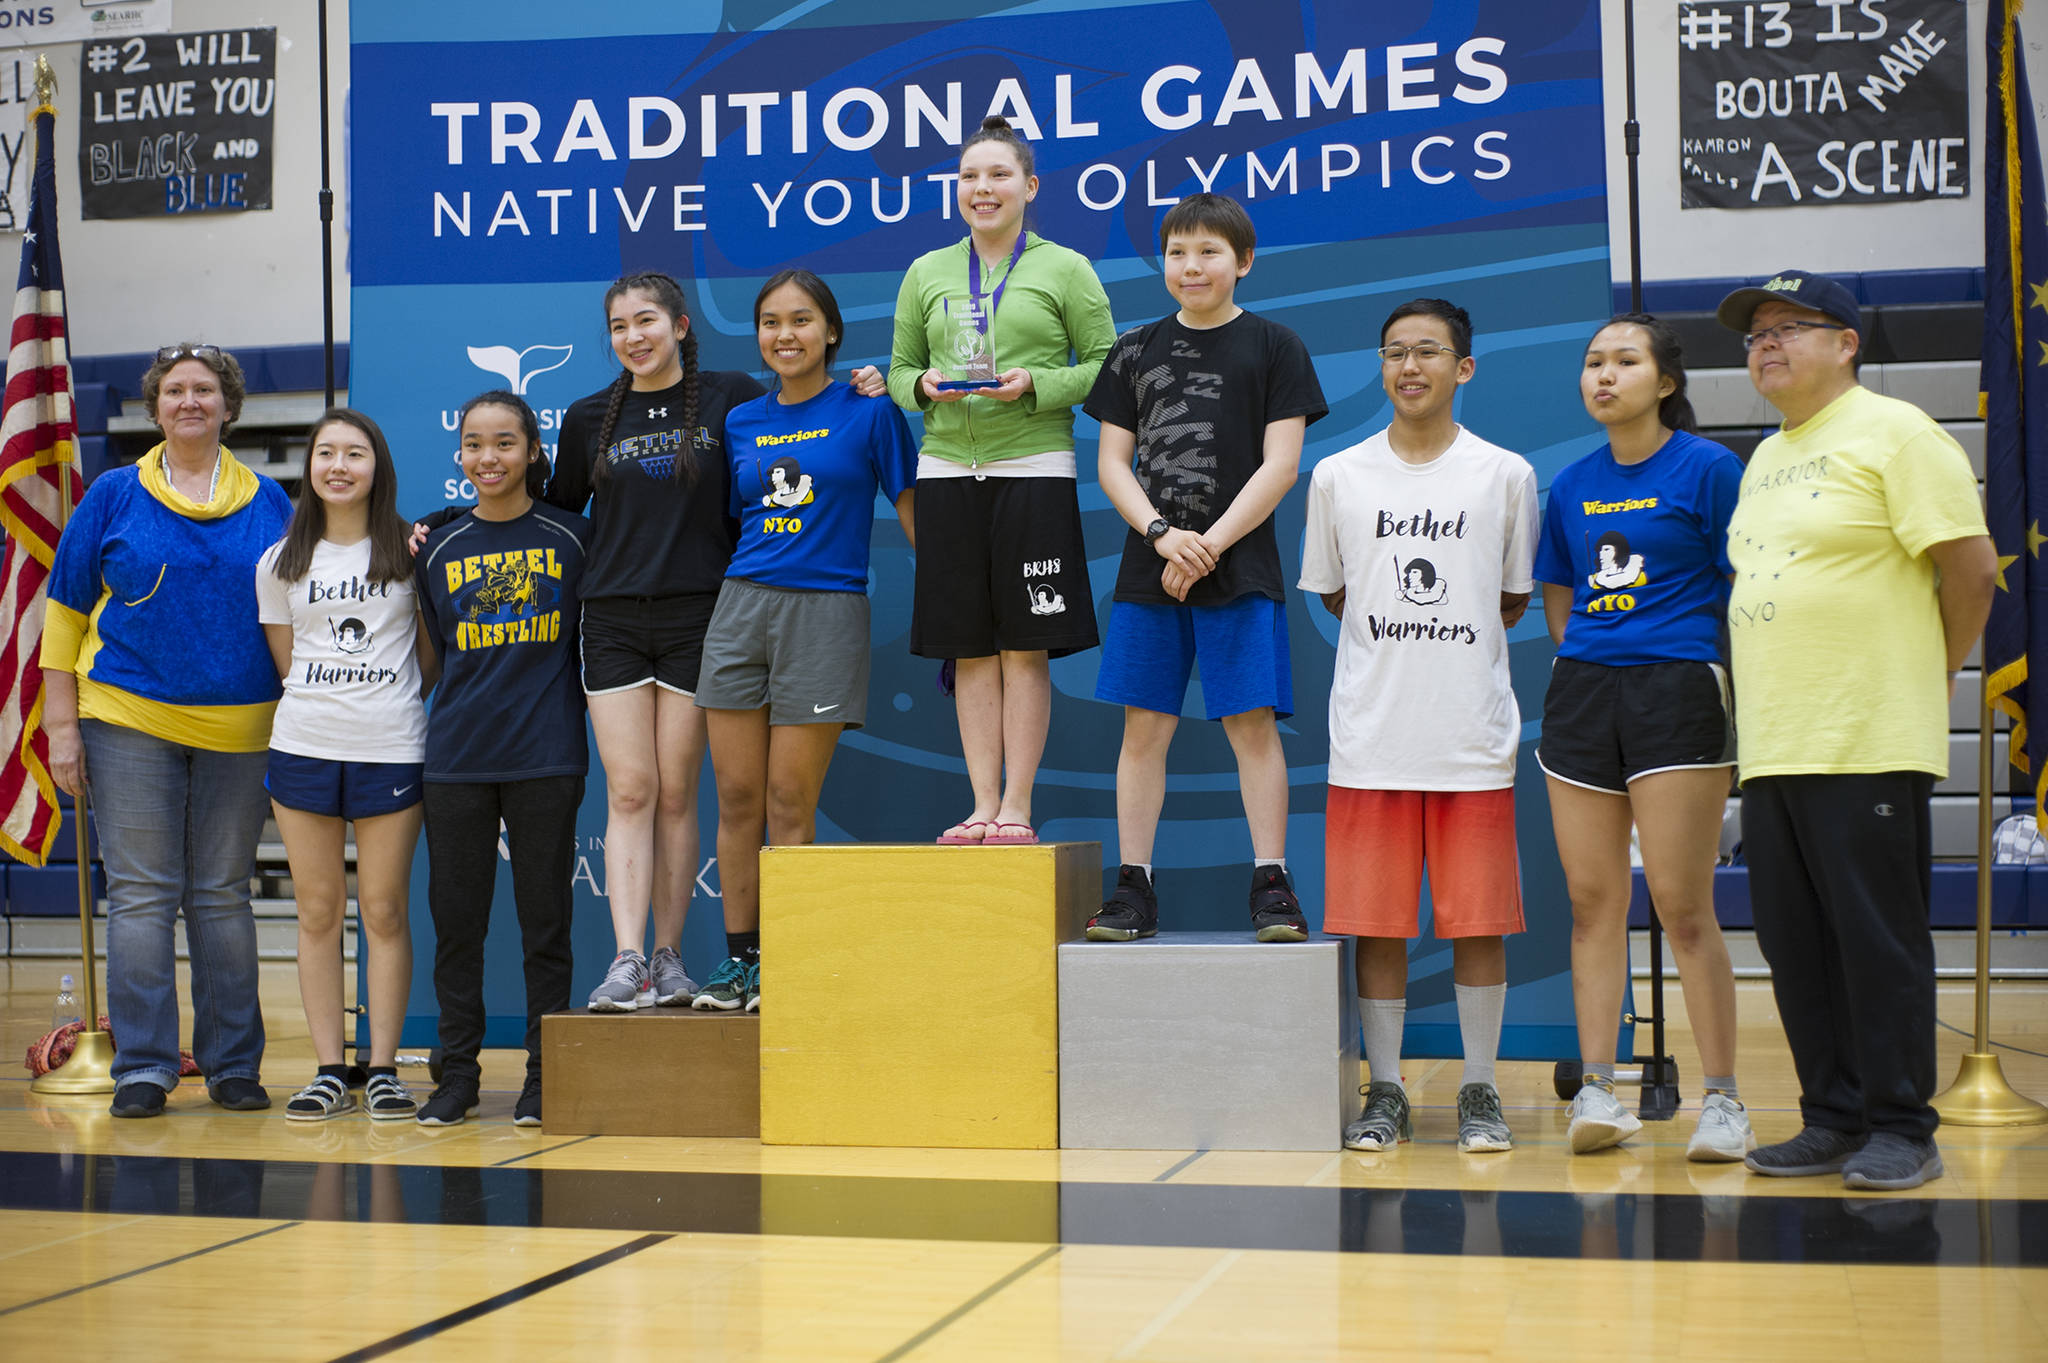 Bethel accepts the overall team award in the large schools category for the 2019 Traditional Games at Thunder Mountain High School on Sunday. Team Anchorage placed second with 104 points and Thunder Mountain placed third with 71 points. (Nolin Ainsworth | Juneau Empire)